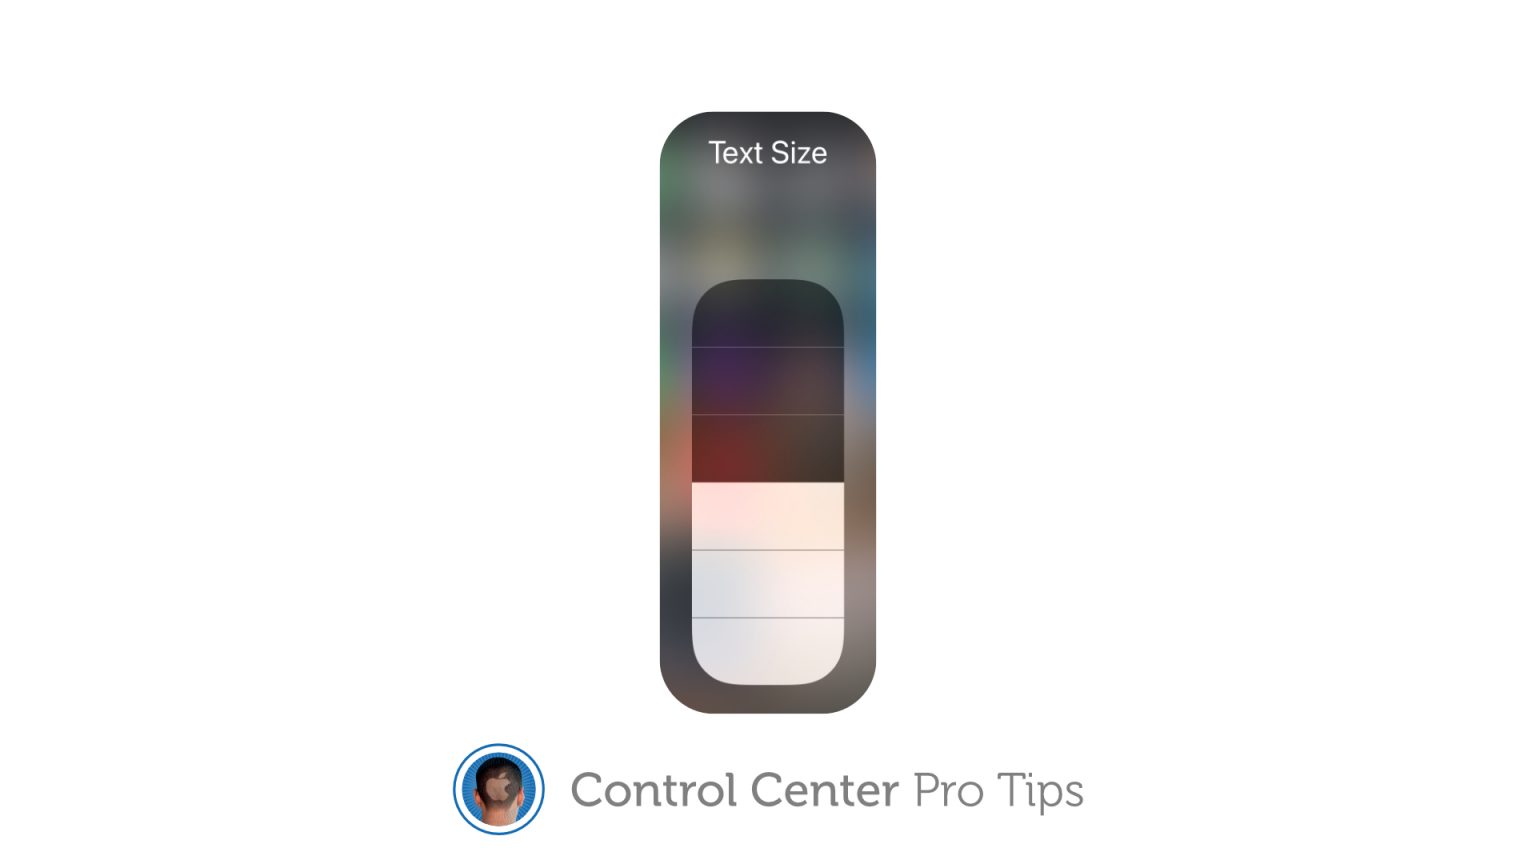 Change system text size in Control Center